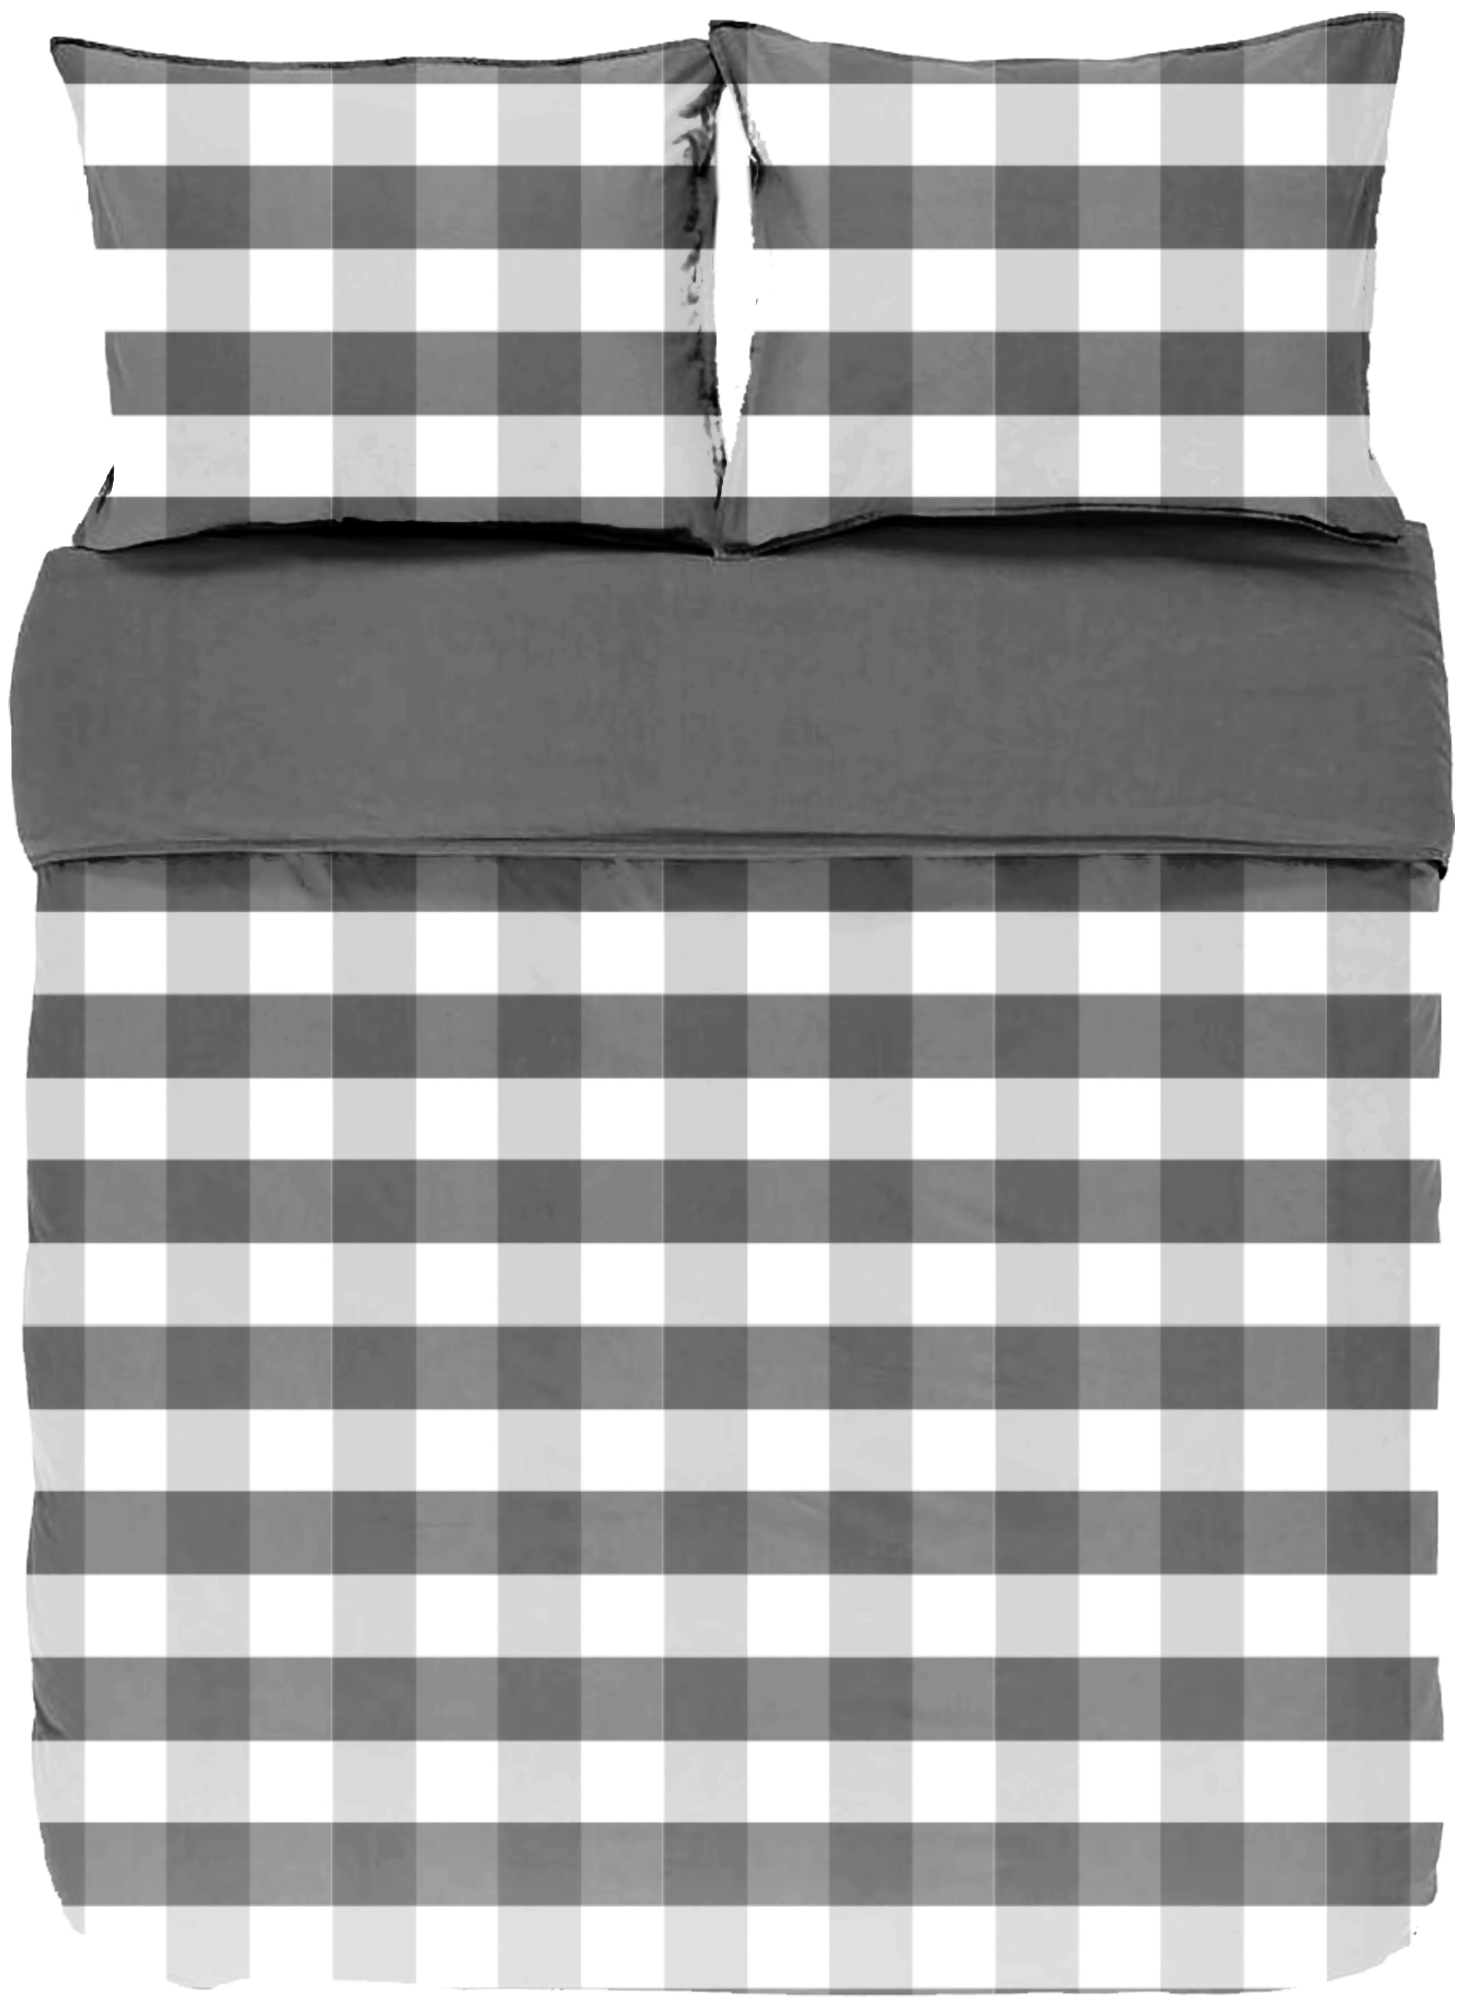 Duvet cover EMMA, Stone washed check cotton, 240x220, grey